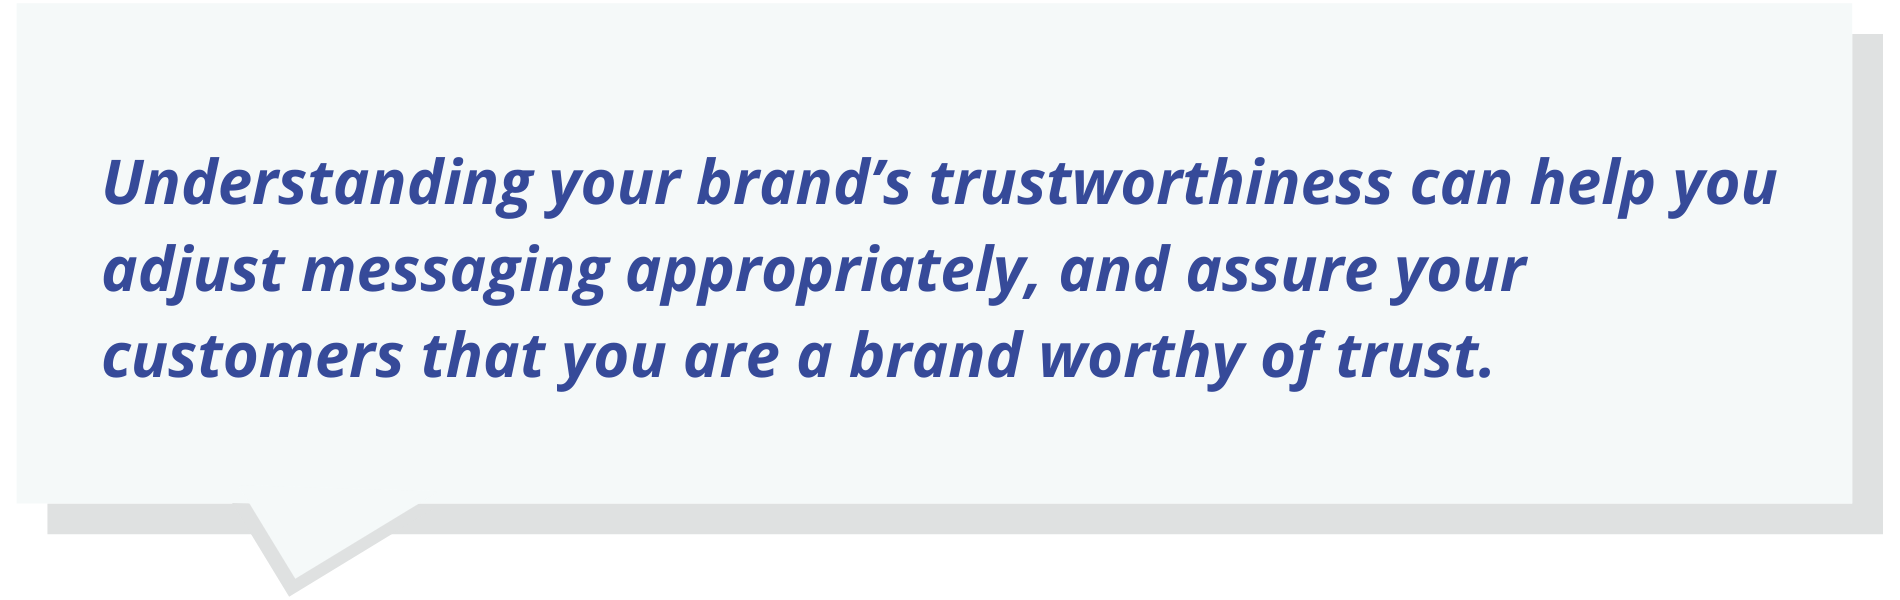 Understanding your brand’s trustworthiness can help you adjust messaging appropriately, and assure your customers that you are a brand worthy of trust.